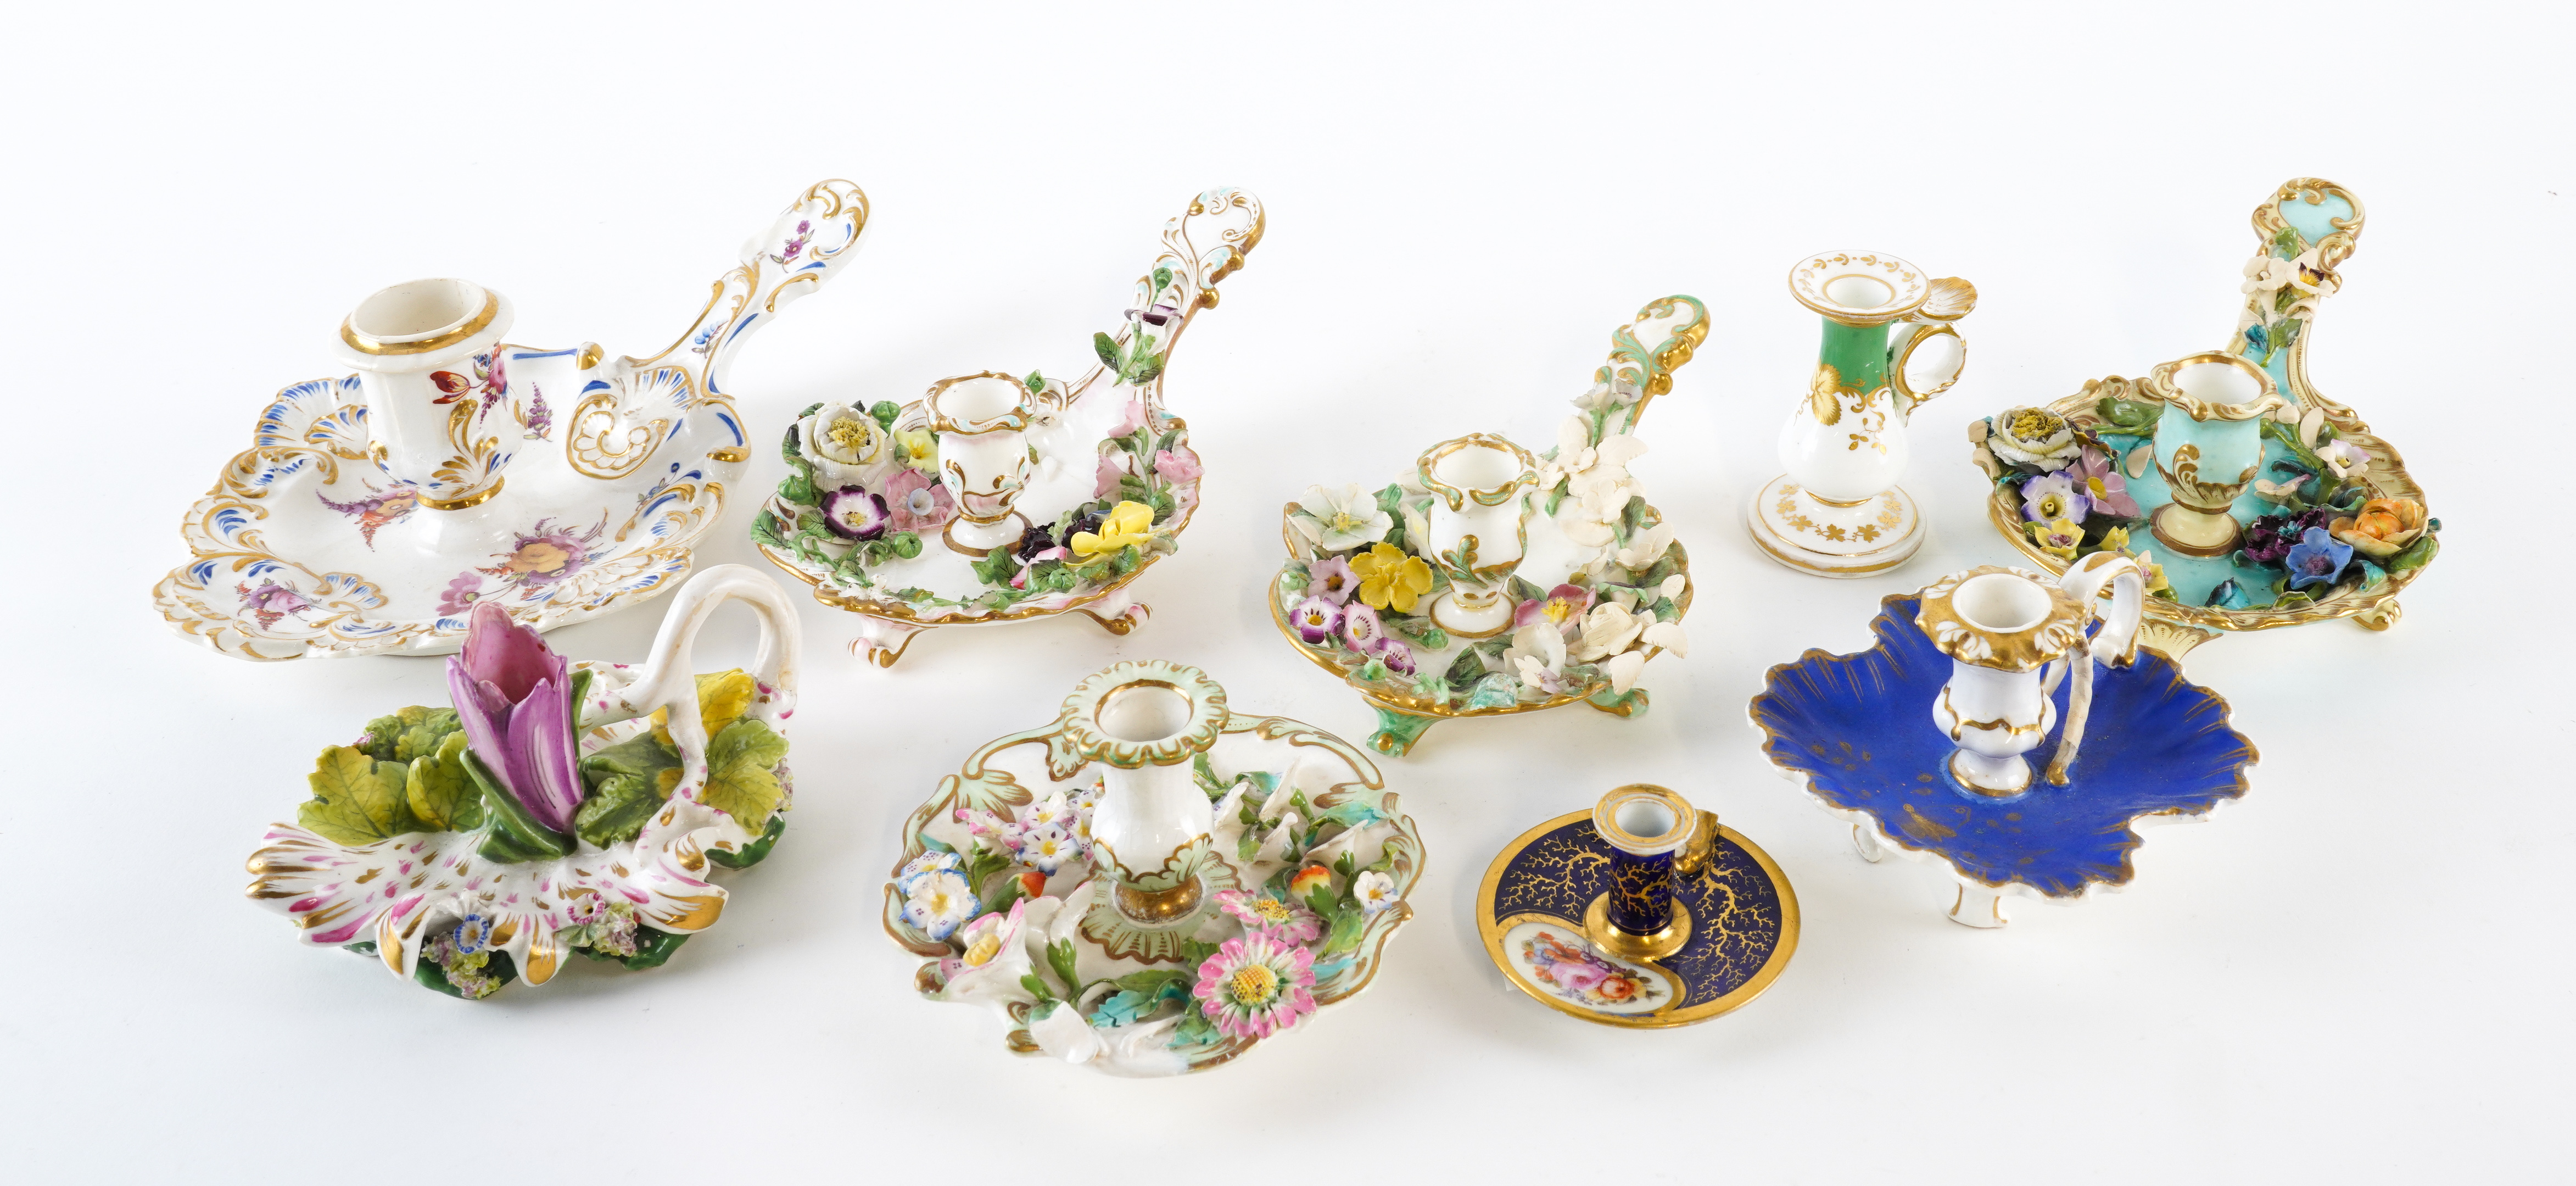 A GROUP OF SEVEN ENGLISH PORCELAIN